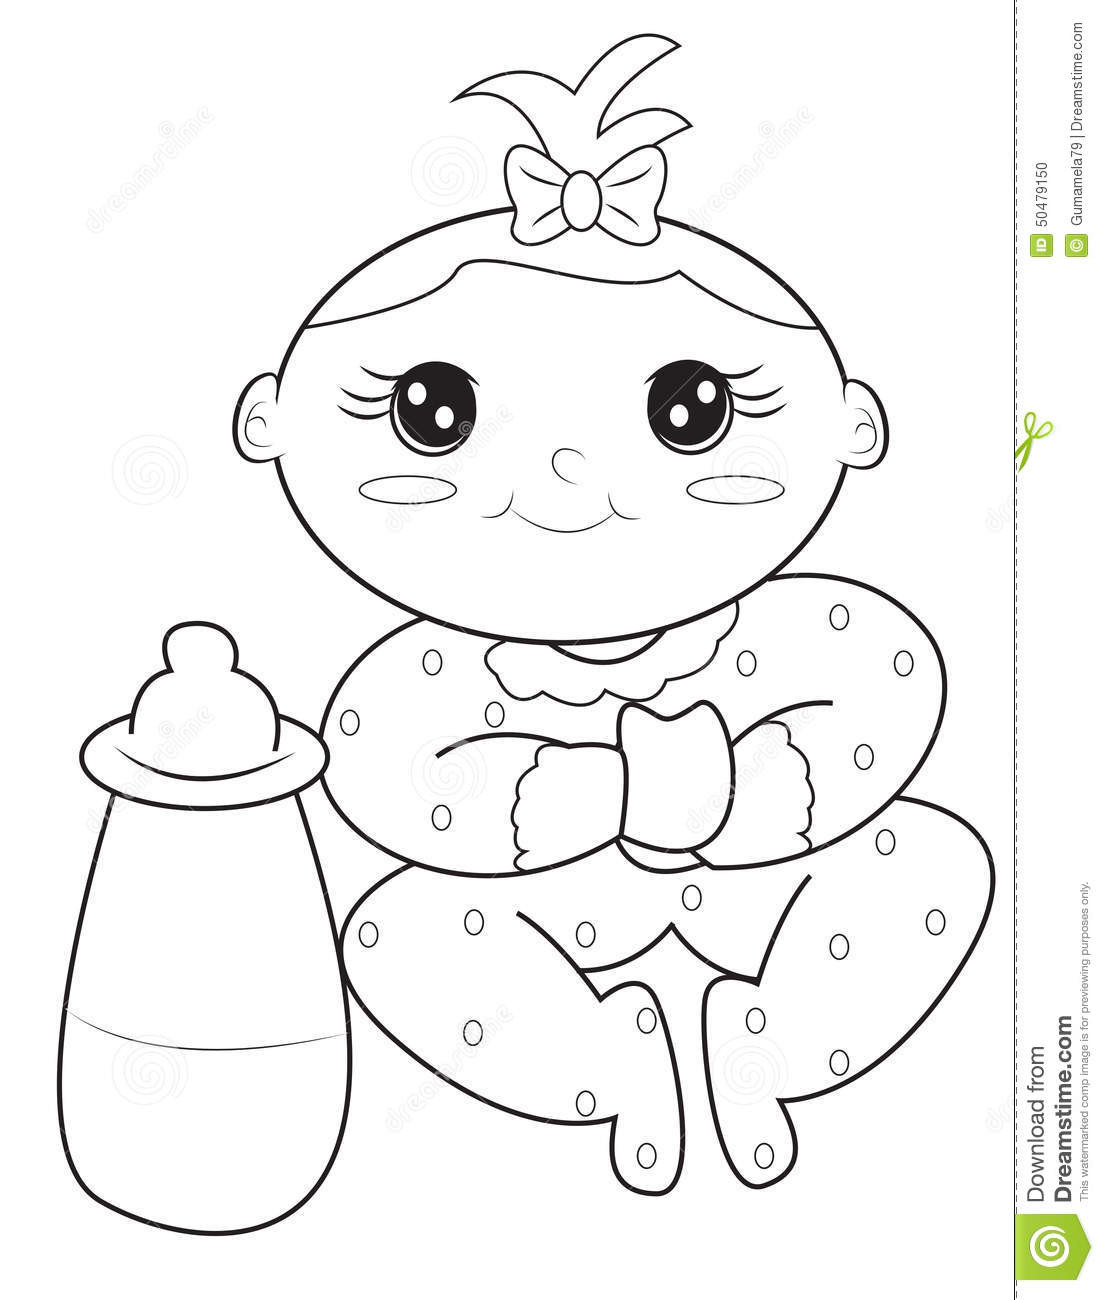 Coloring Book For Baby
 Baby girl coloring page stock illustration Illustration